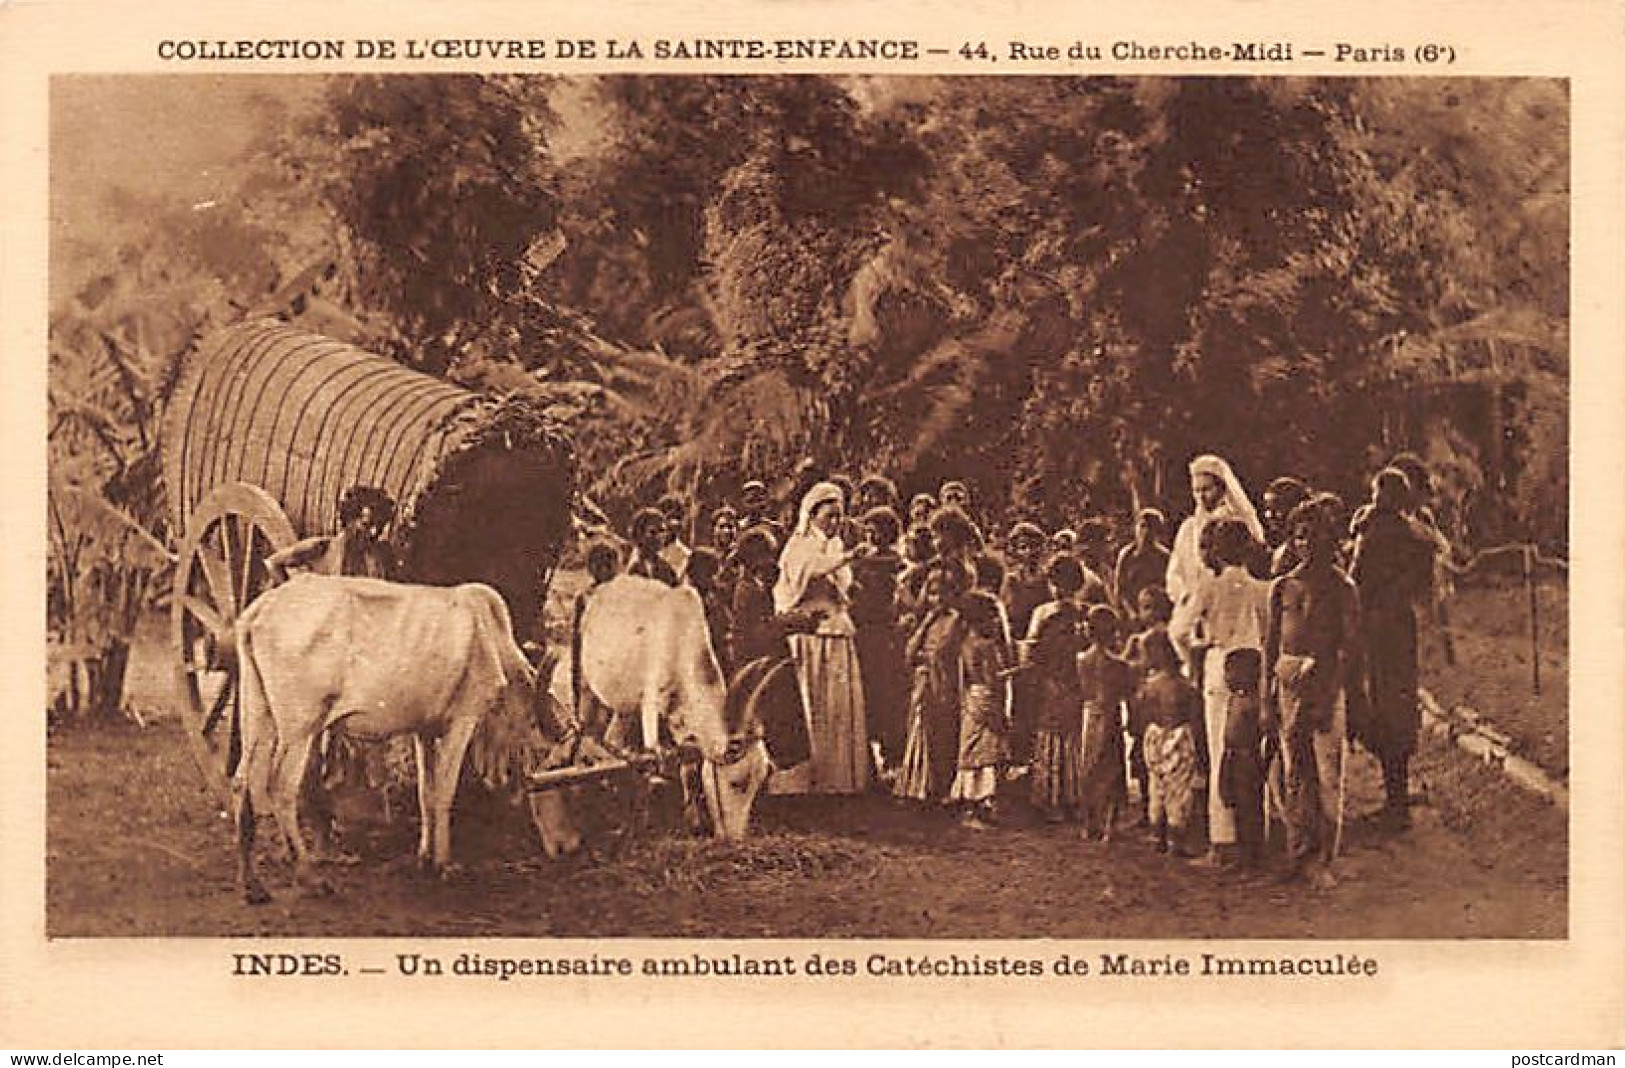 India - A Mobile Dispensary Of The Missionary Catechists Of Mary Immaculate - Publ. Oeuvre De La Sainte-Enfance  - Indien